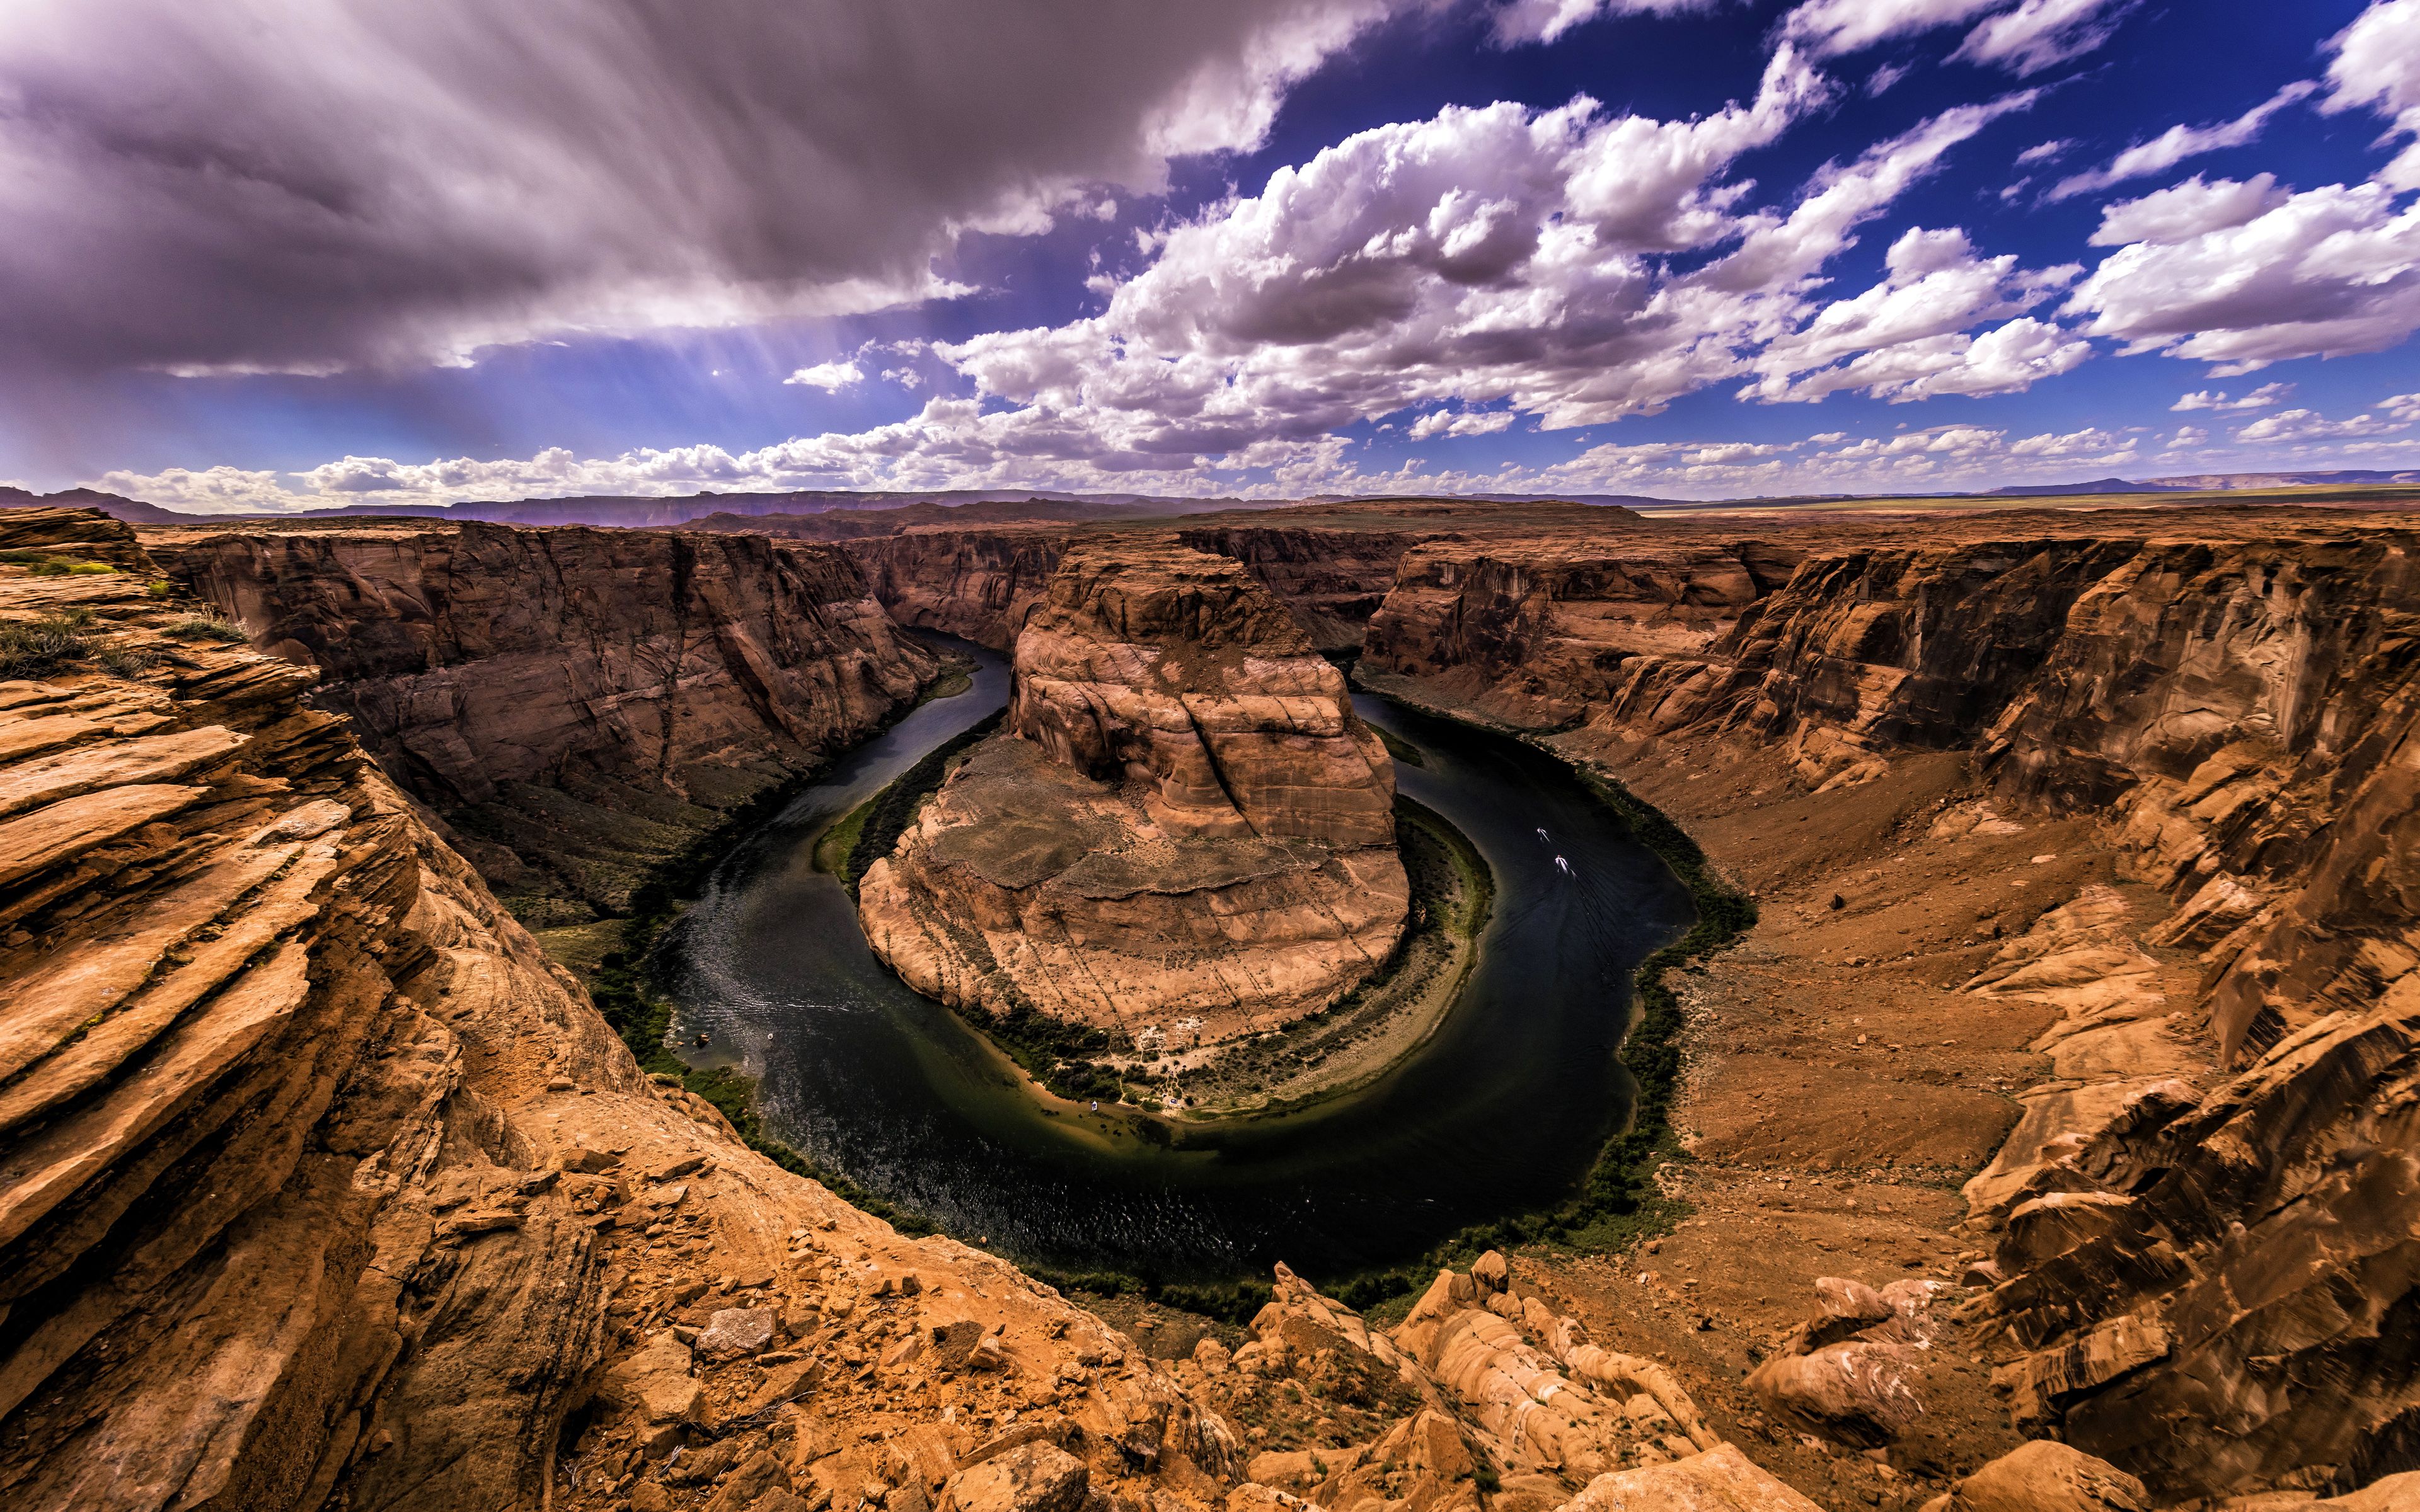 Download wallpaper Colorado River, 4k, Horseshoe Bend, rocks, american landmarks, Grand Canyon National Park, America, USA, HDR for desktop with resolution 3840x2400. High Quality HD picture wallpaper